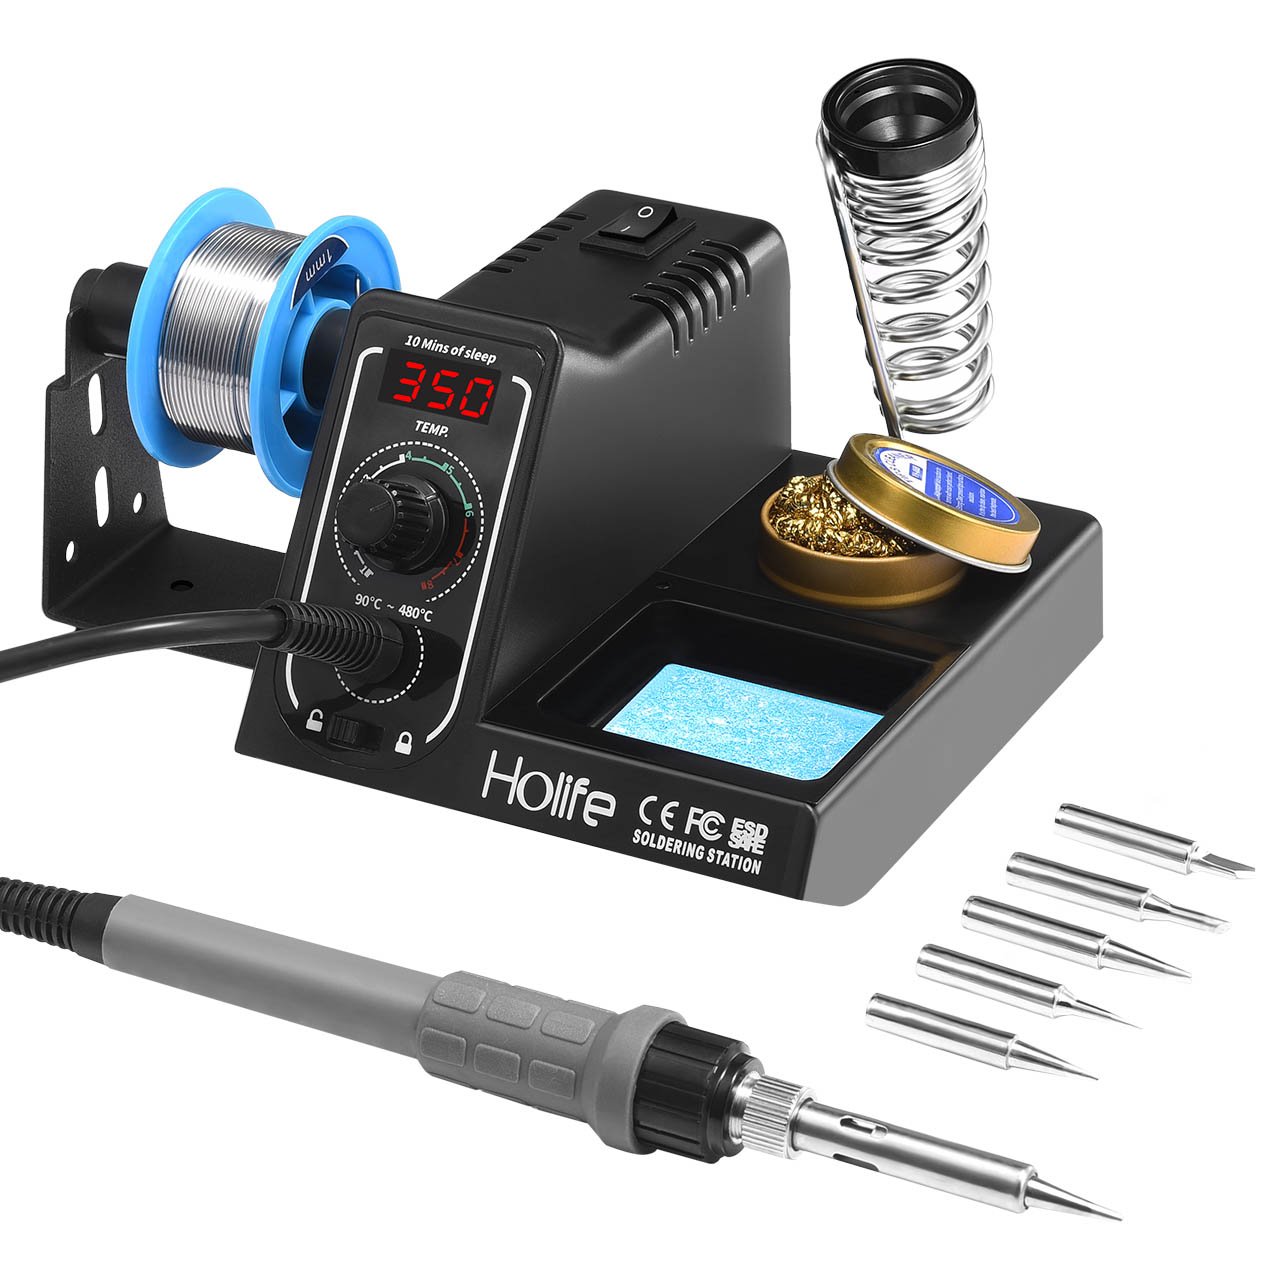 Why soldering stations works exceptionally well?